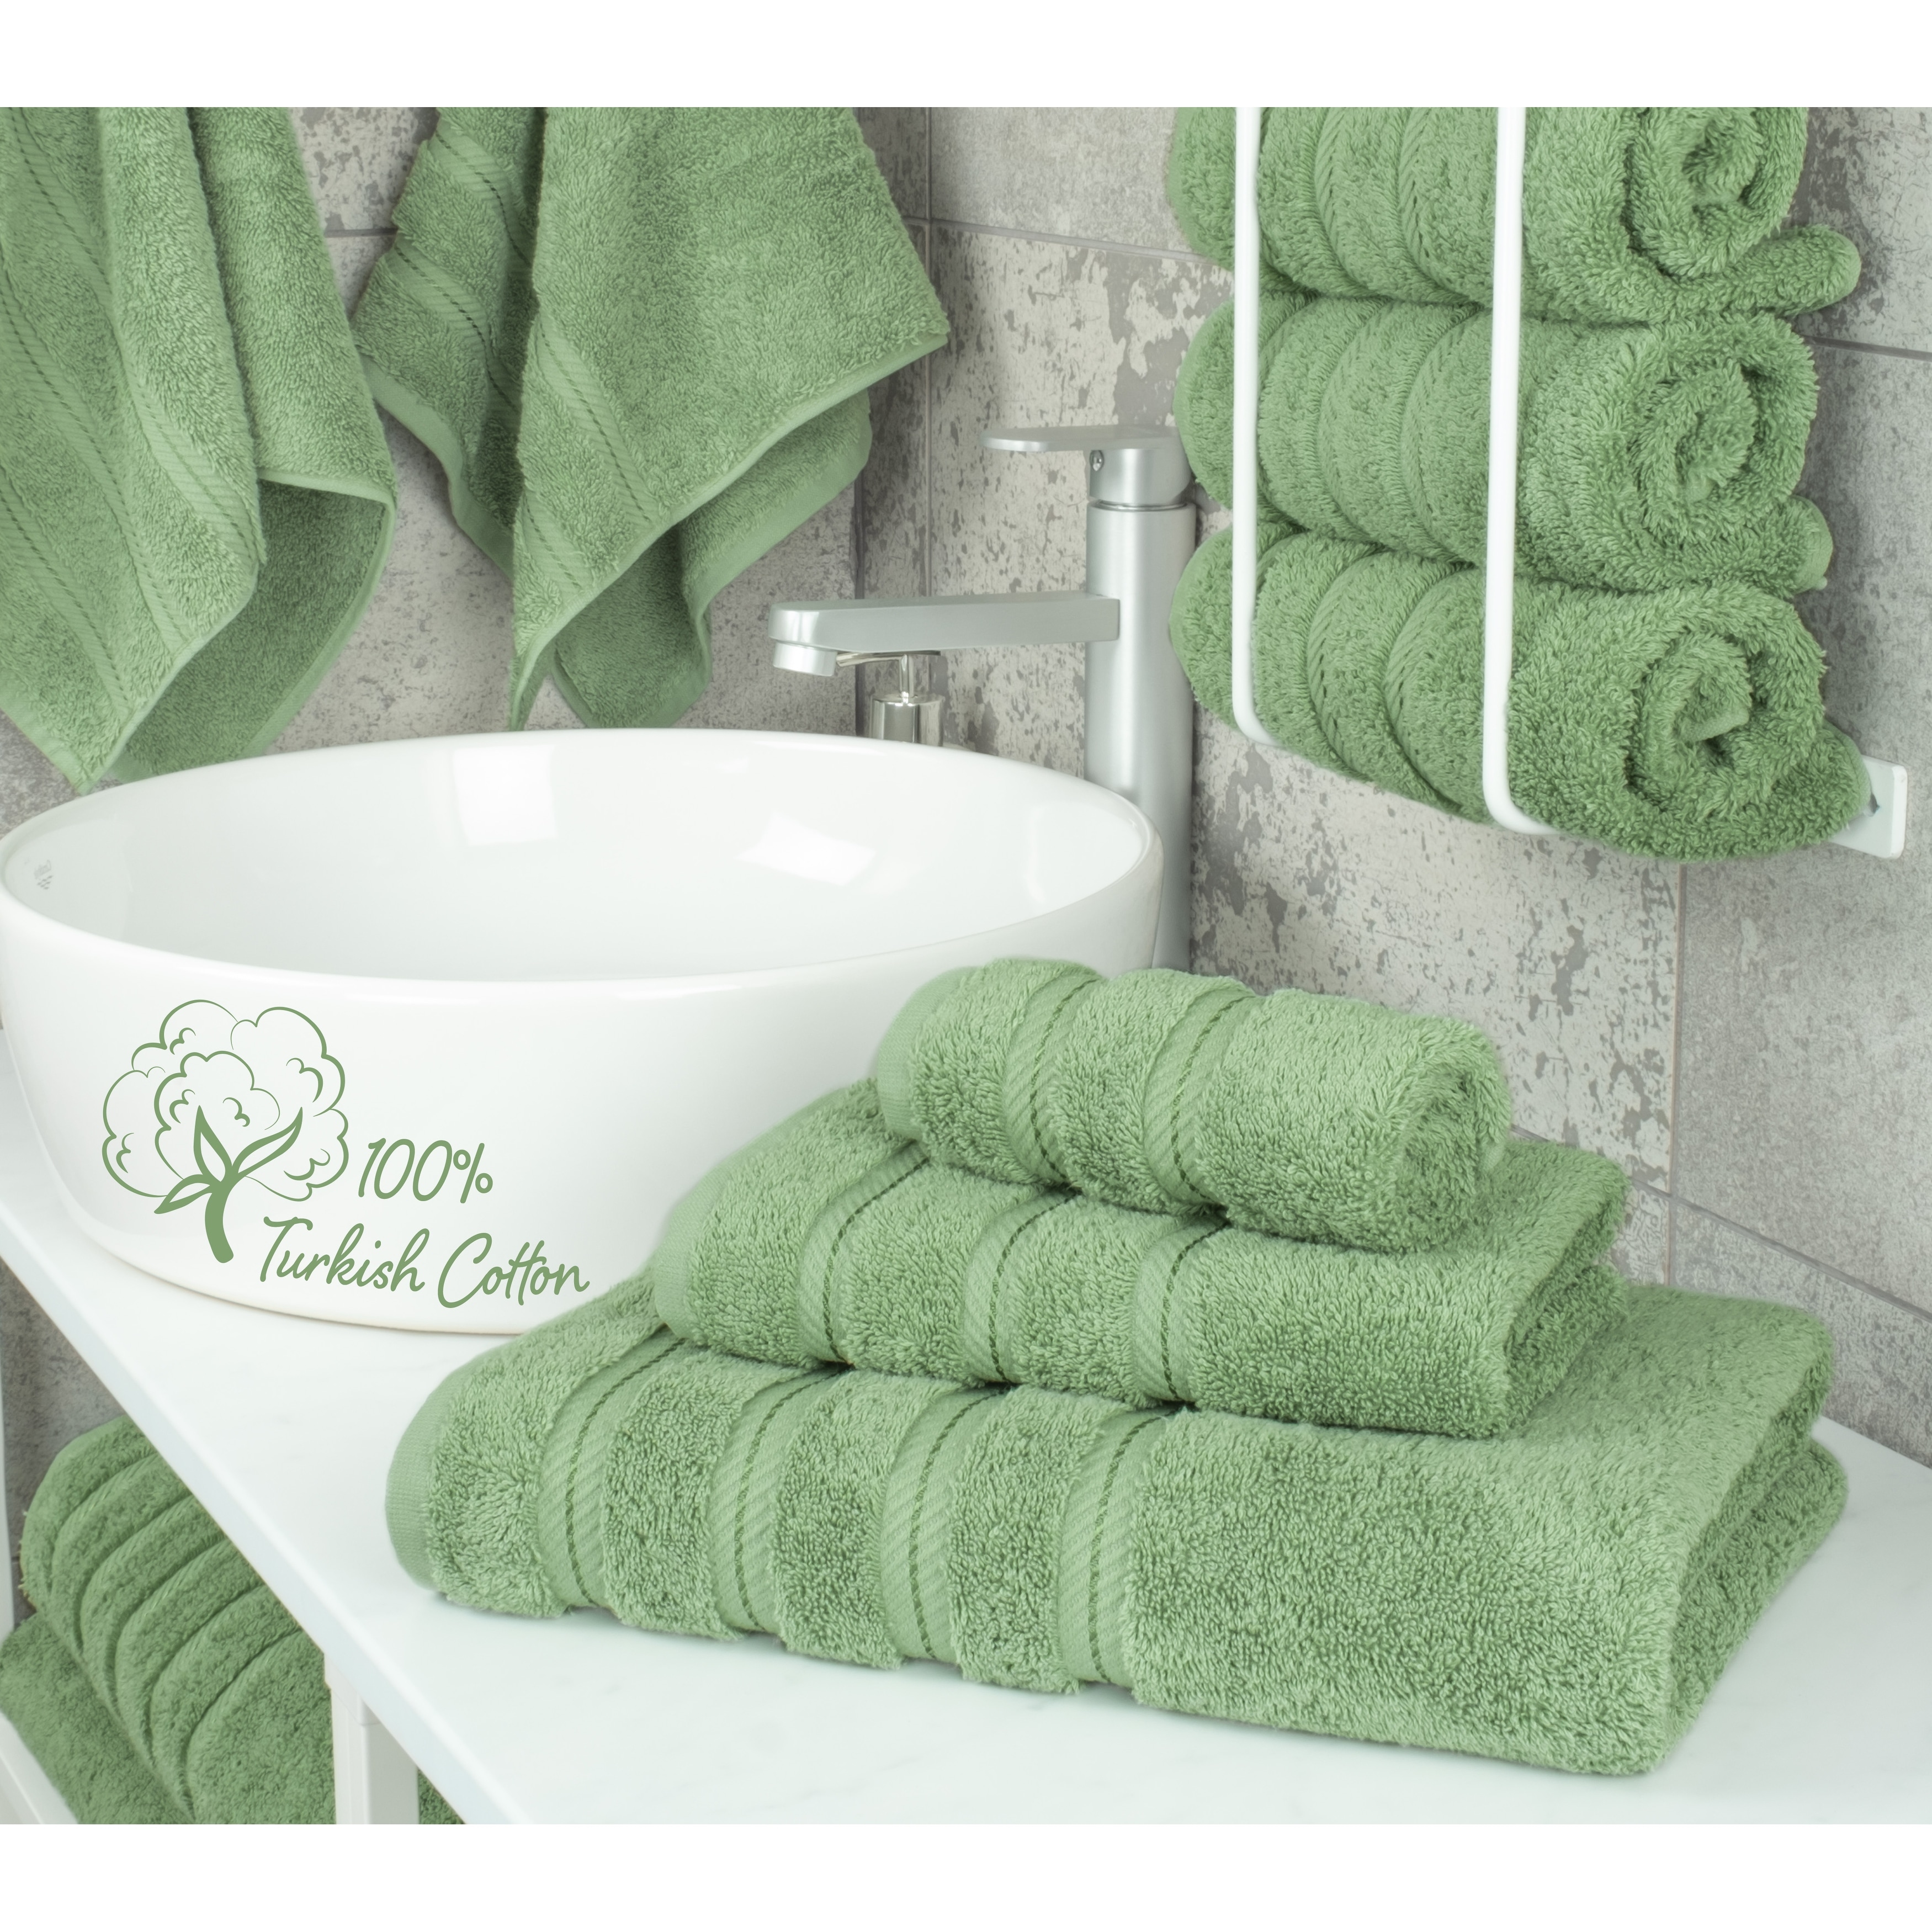 American Soft Linen Luxury Hotel & Spa Quality, Turkish Cotton, 27x54  Inches 4-Piece Bath Towel Set for Maximum Softness & Absorbency, Dry  Quickly - Sage Green 